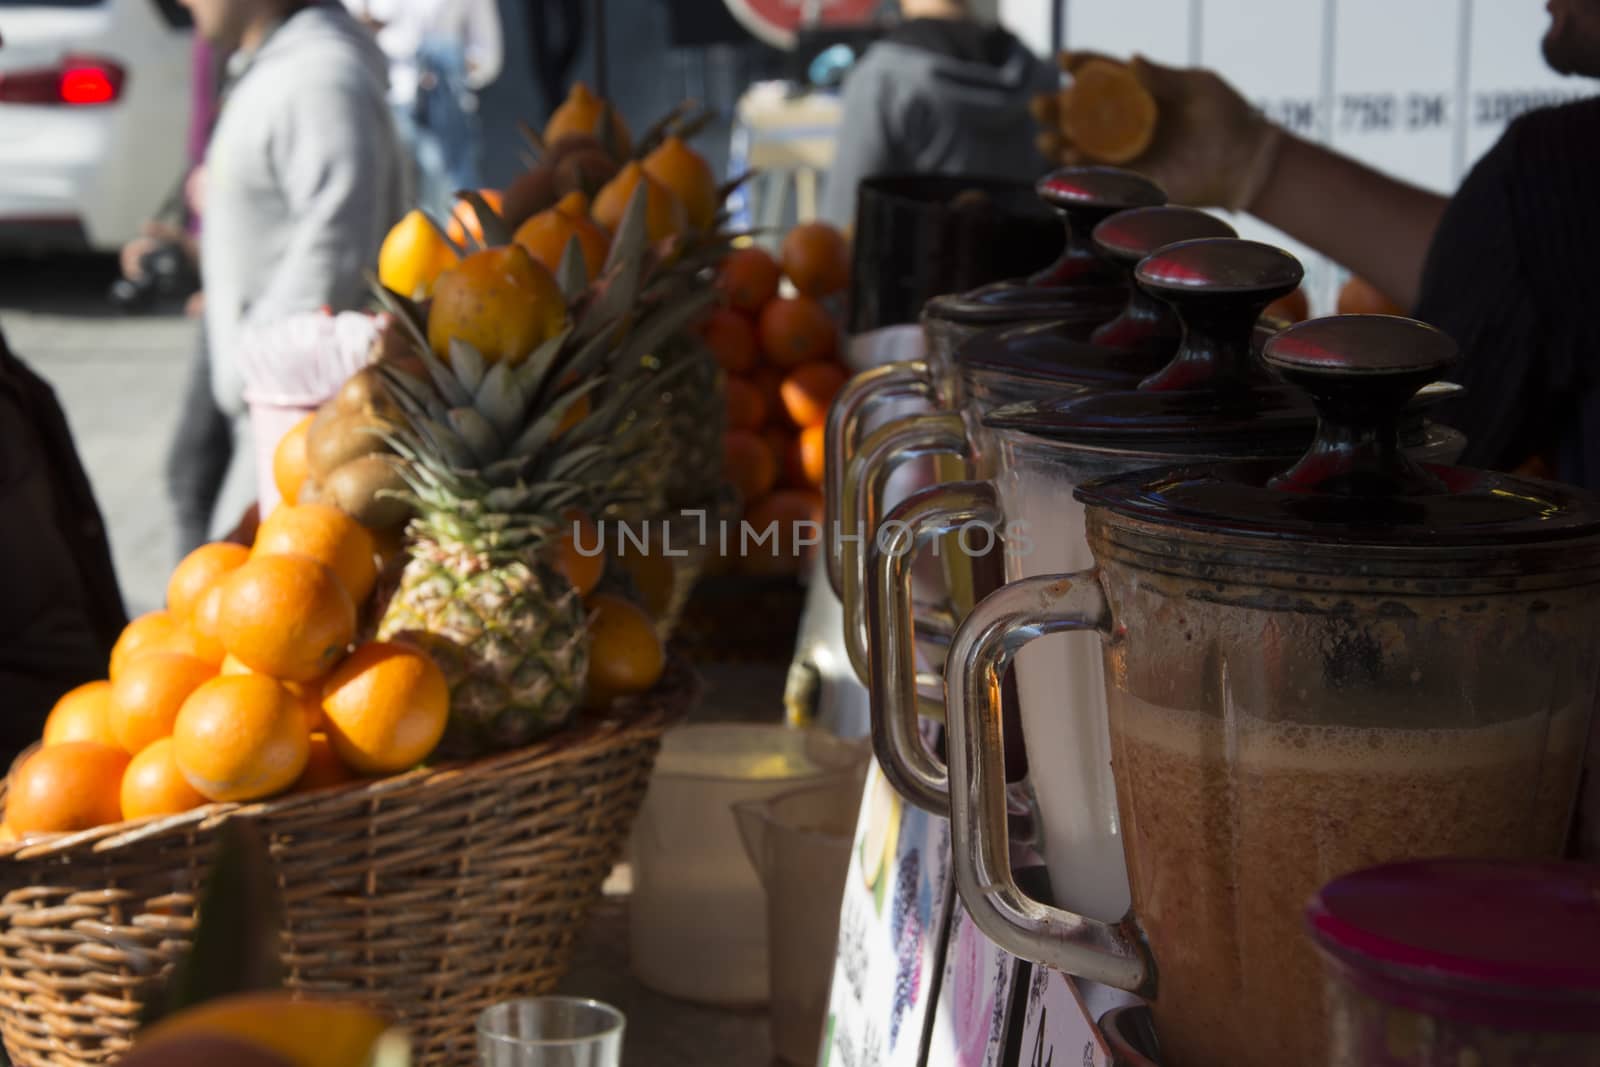 Freshly squeezed fruit juice seller. There are all kinds of fruits